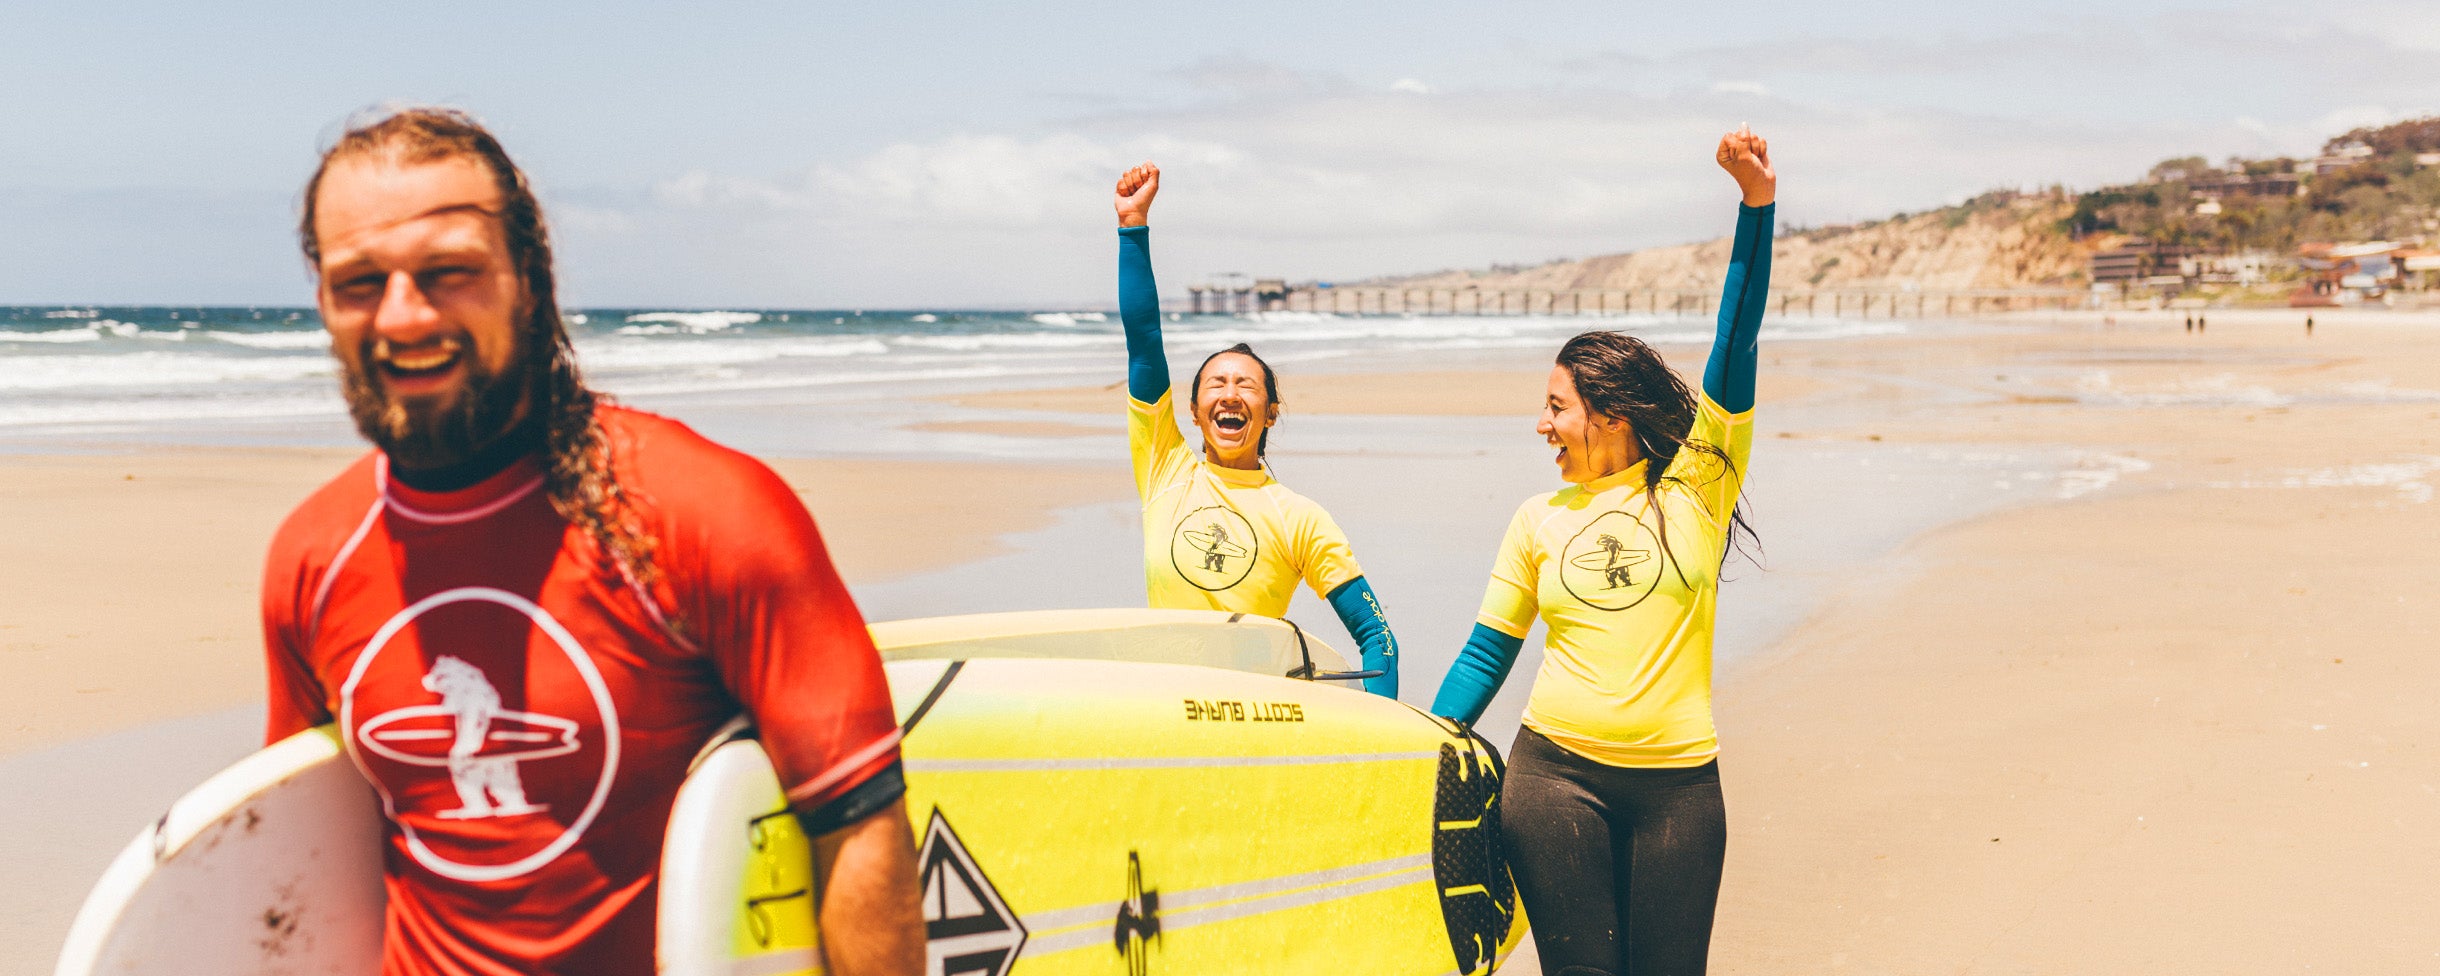 After a private surf lesson, two girls cheer with their instructor that they successfully caught some waves and stood up on the board in San Diego, La Jolla, California. 